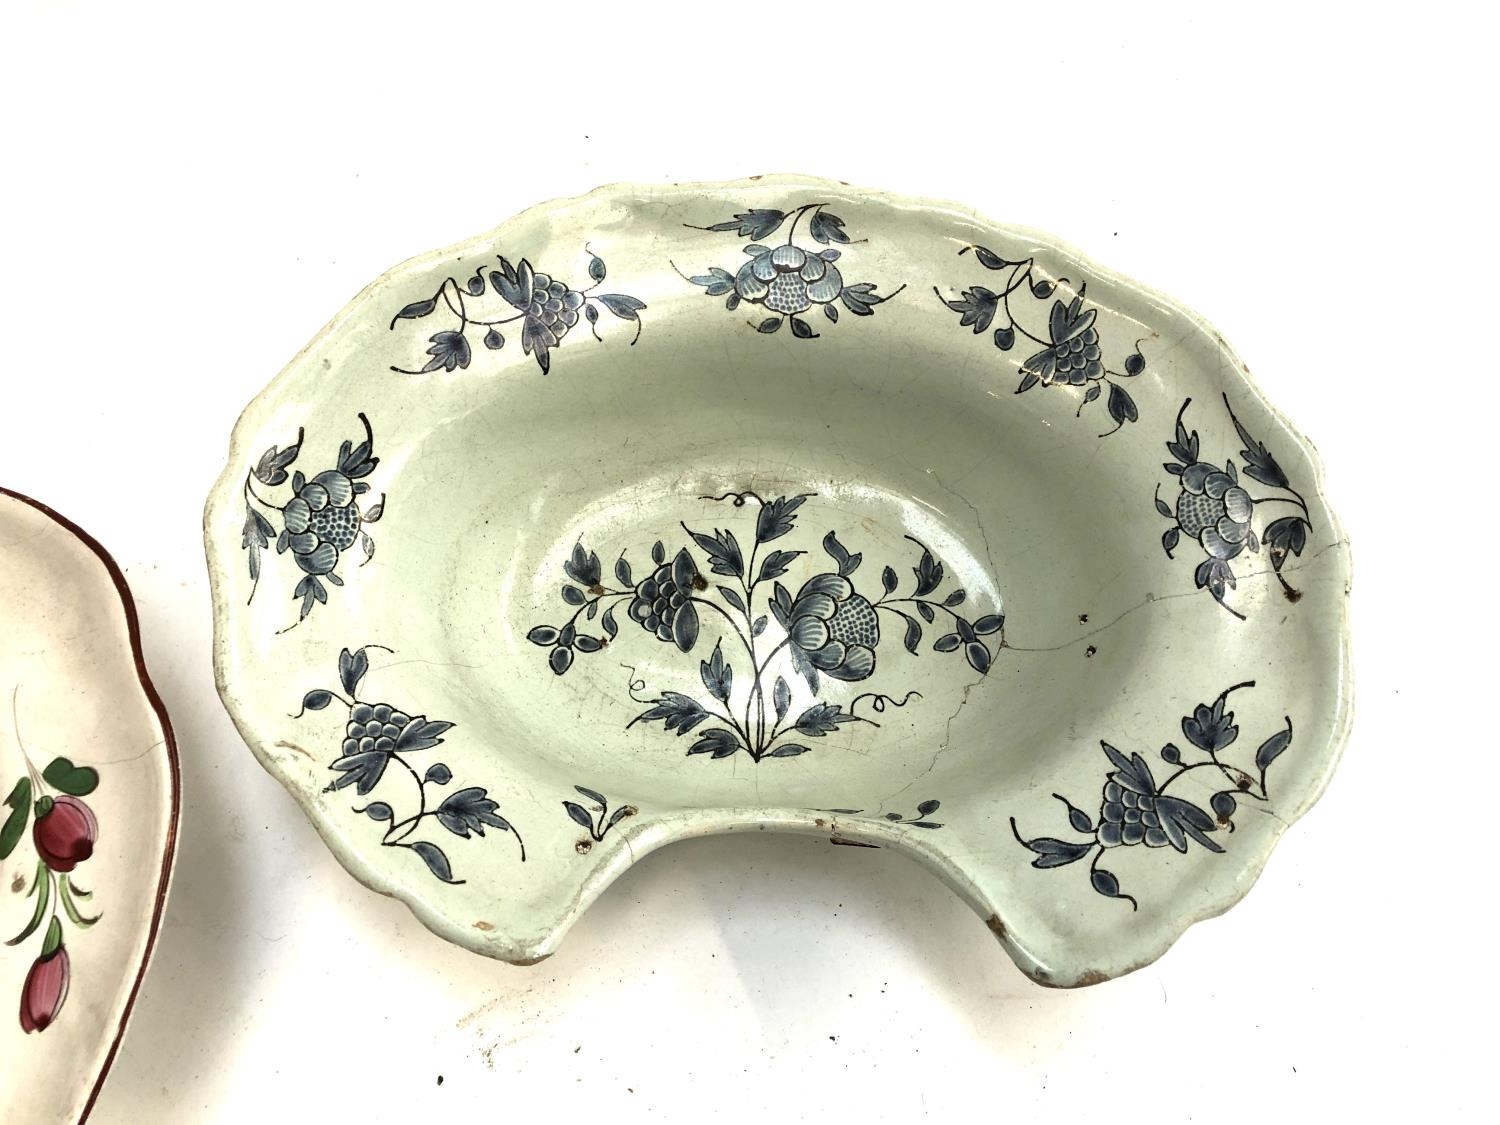 Two ceramic shaving dishes, both with floral designs, with staple repairs, 30cmW & 33cmW (af) - Image 3 of 5